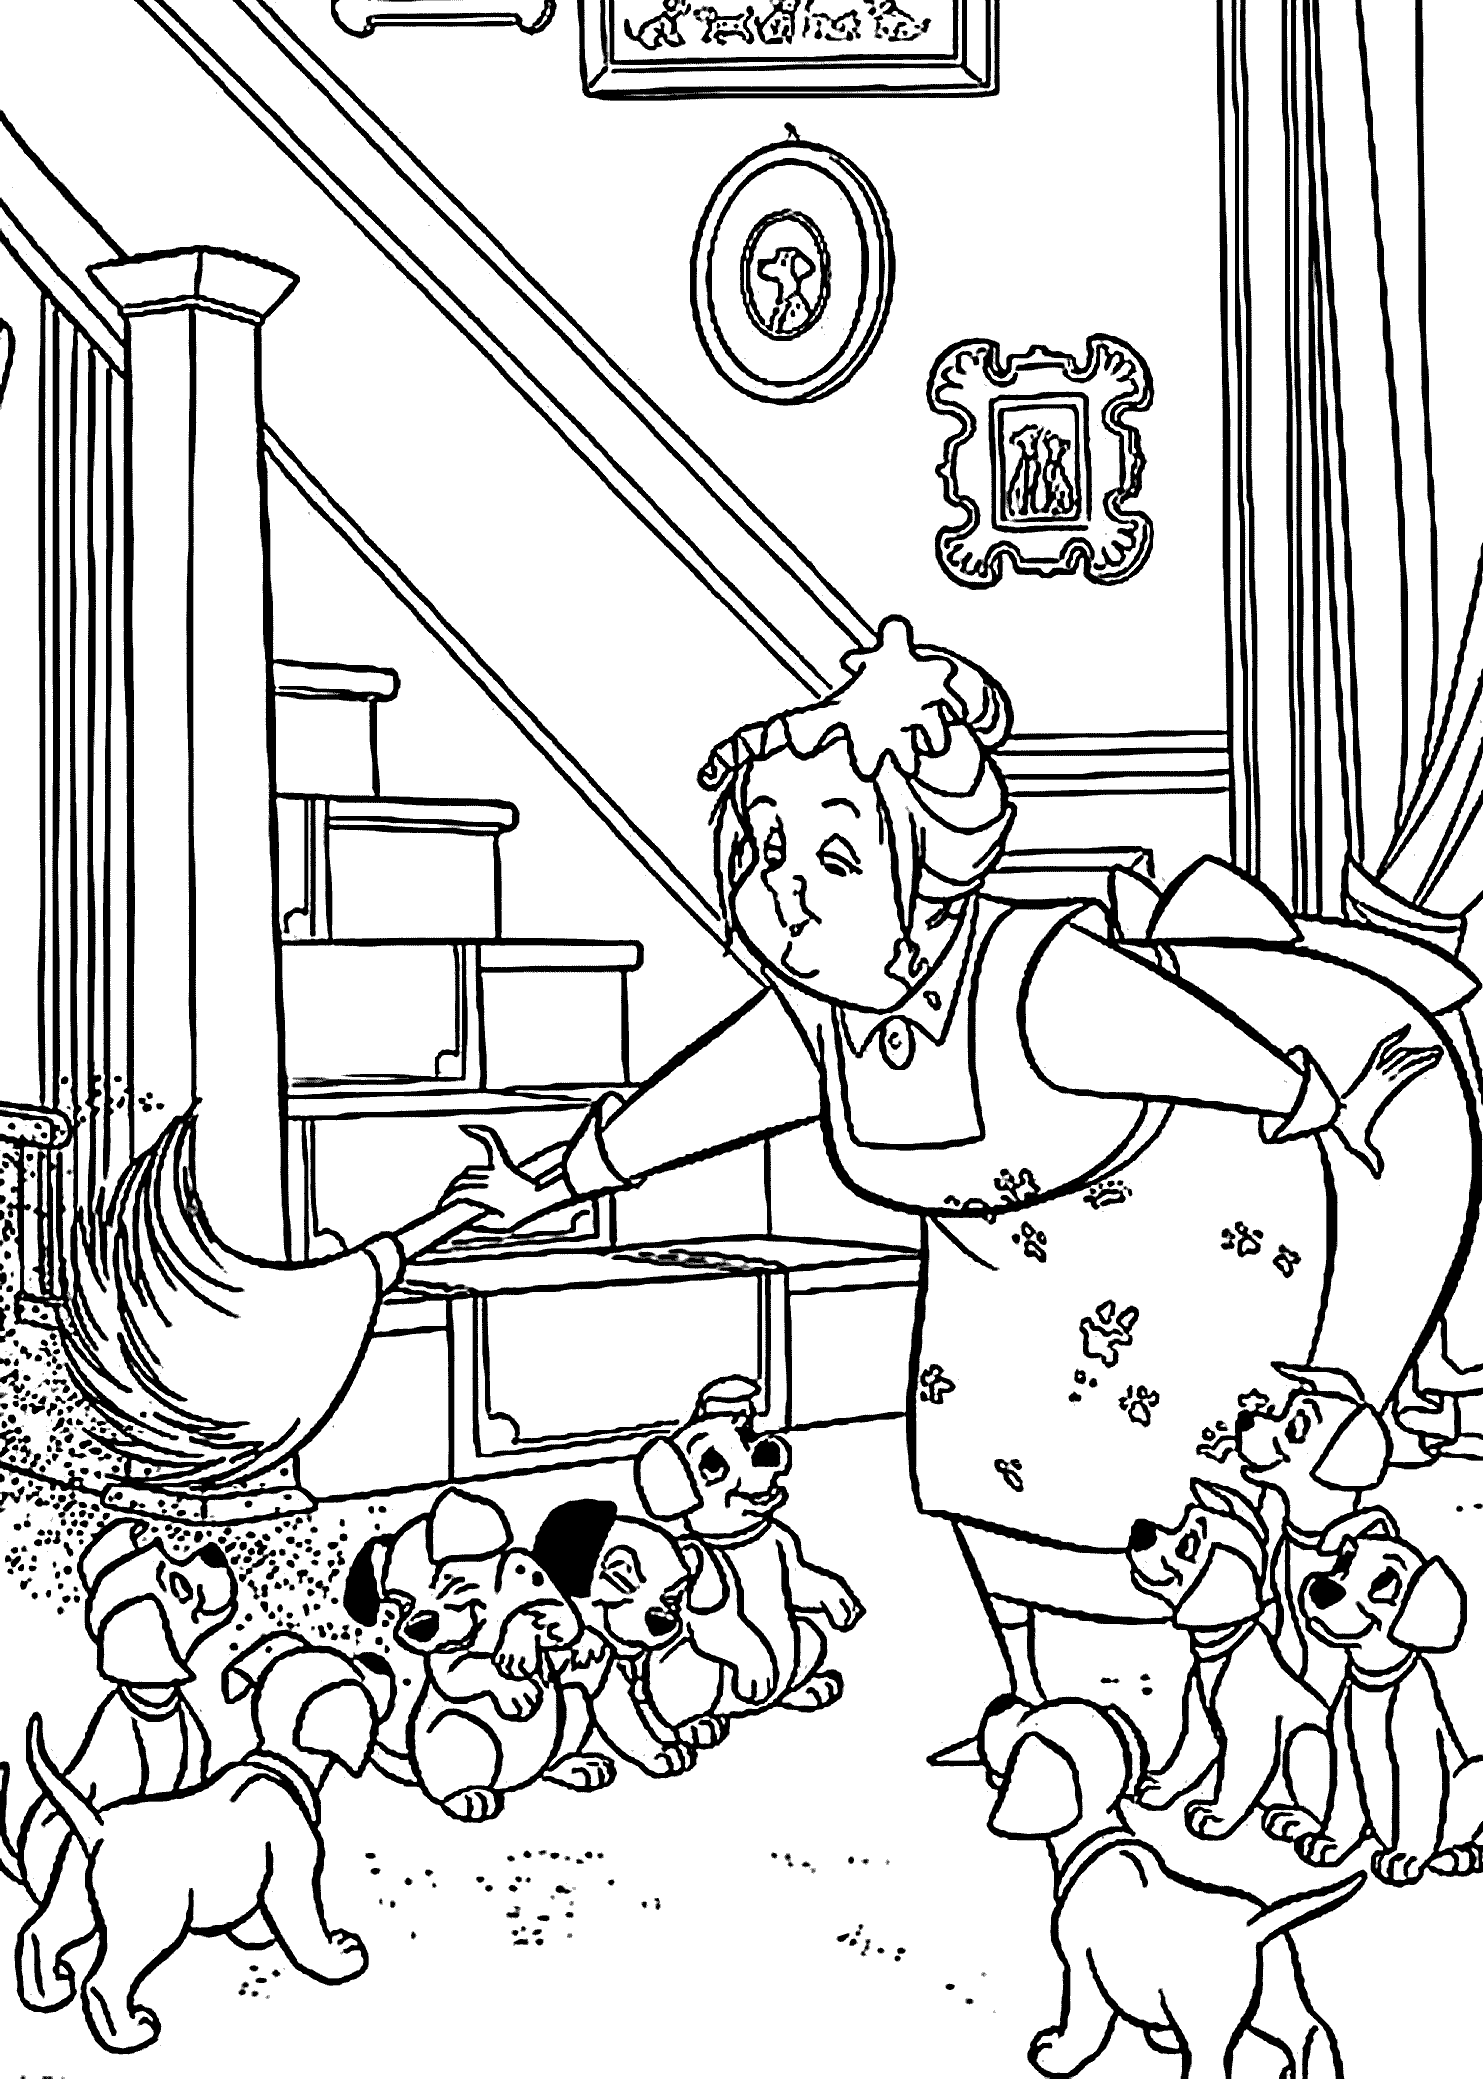 Dusting Dalmations Coloring Page